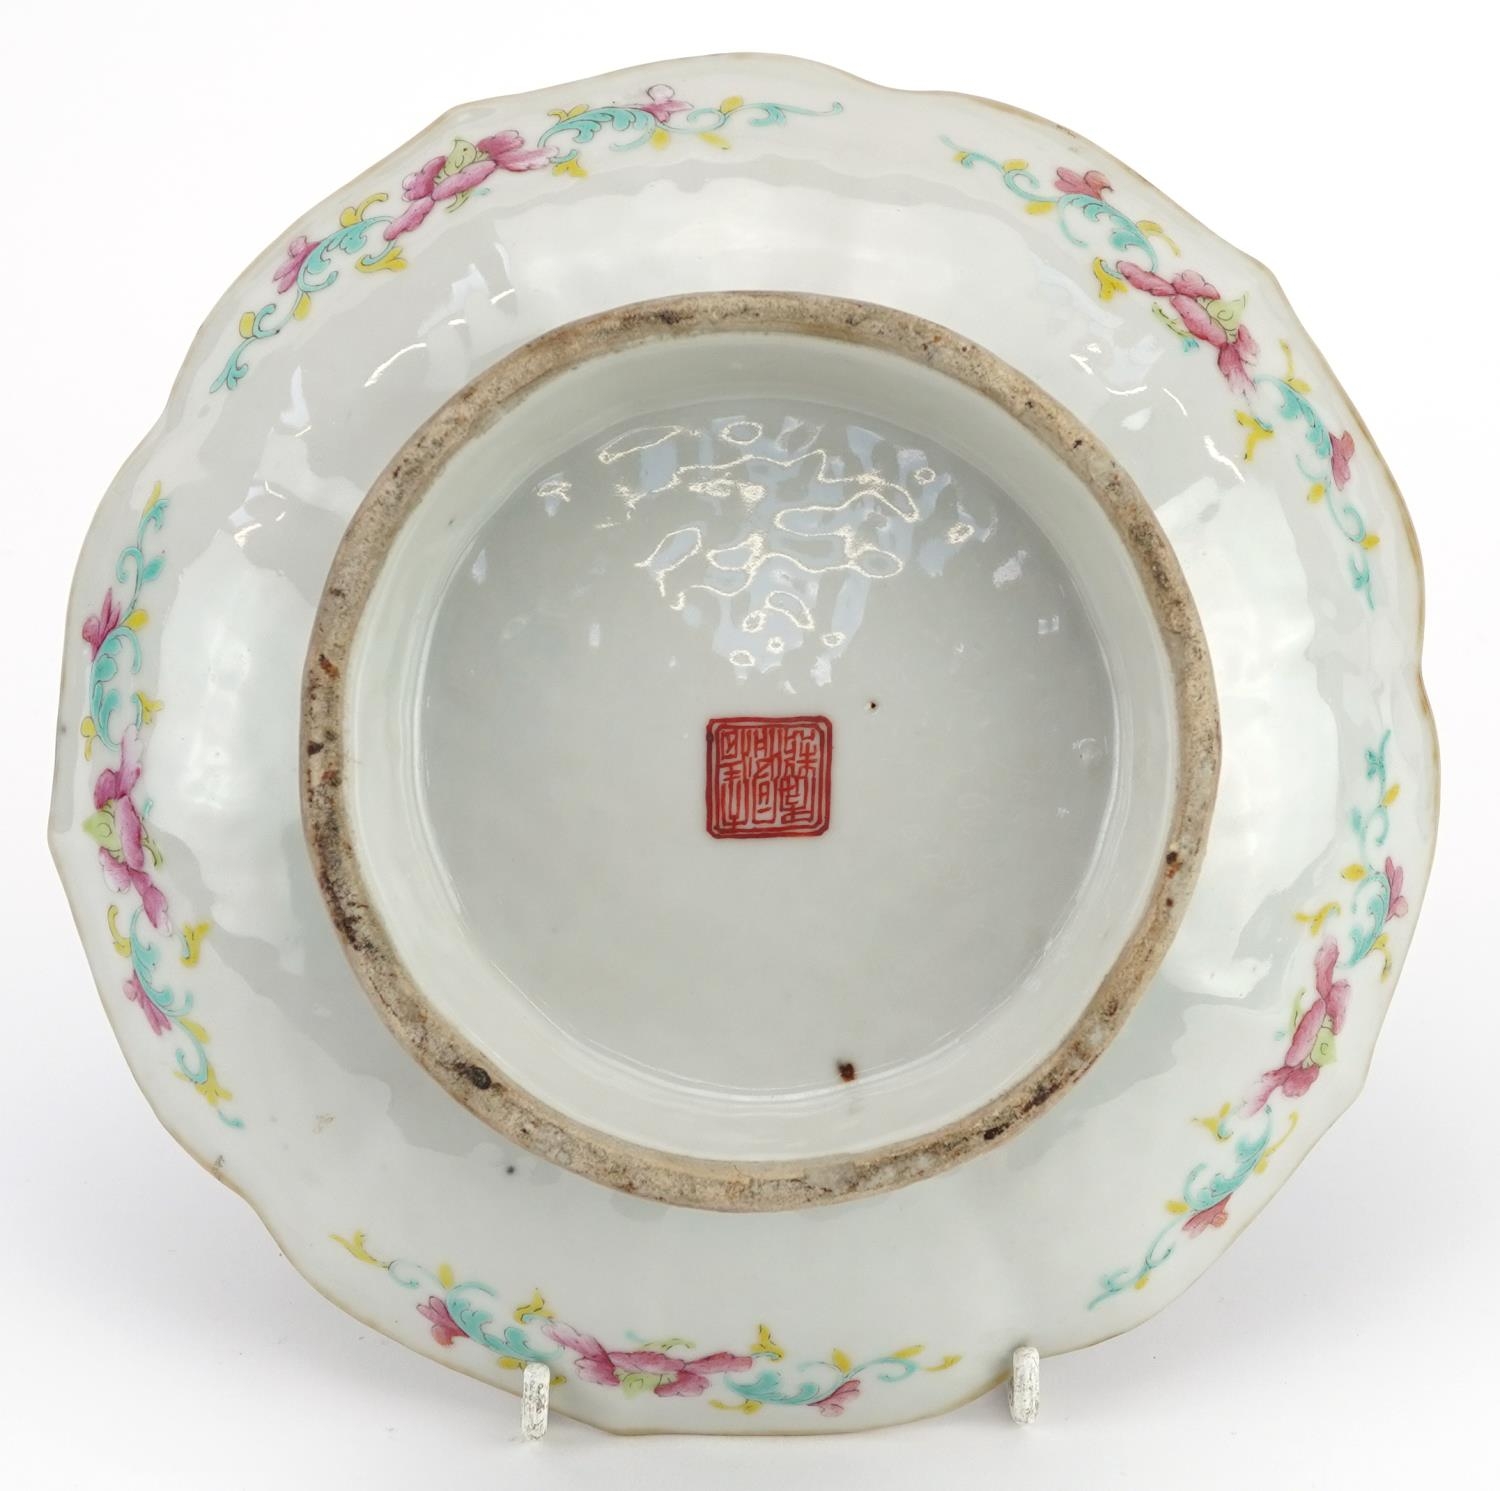 Chinese porcelain footed dish hand painted with cranes amongst clouds, six figure iron red character - Image 4 of 5